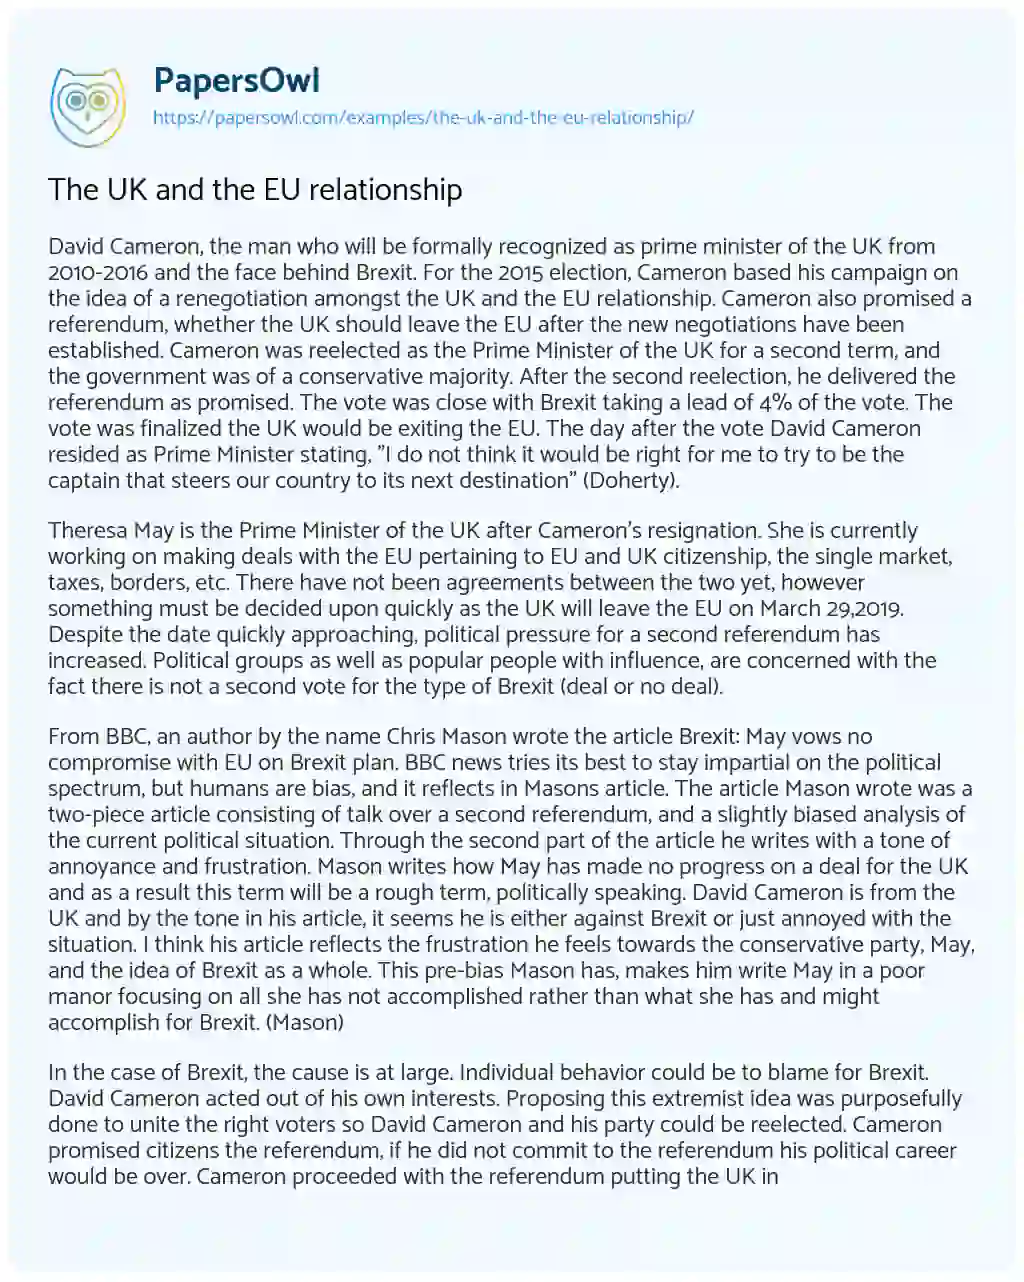 Essay on The UK and the EU Relationship